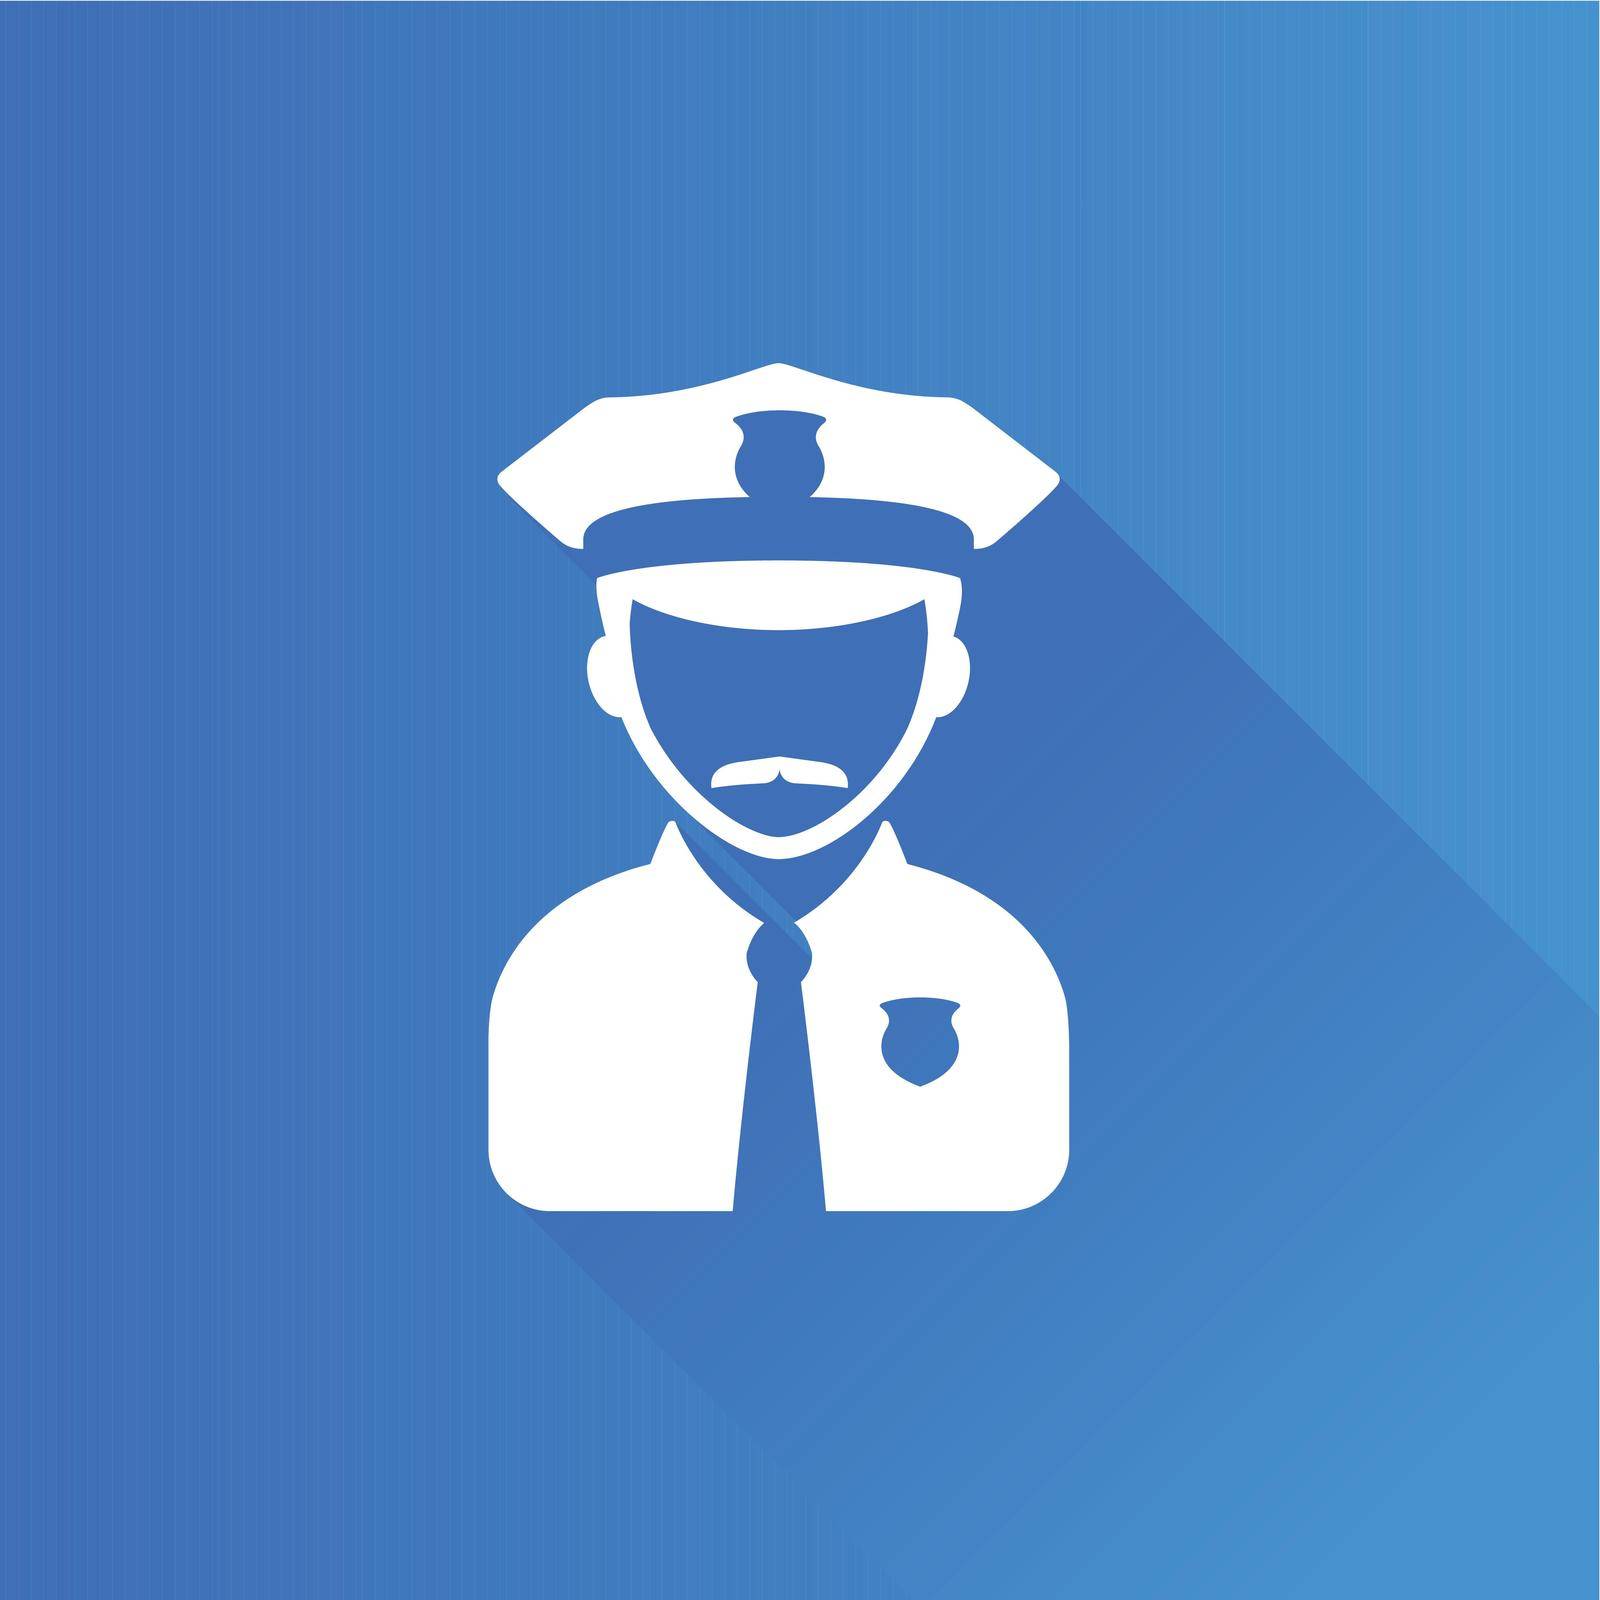 Police avatar icon in Metro user interface color style. People service security